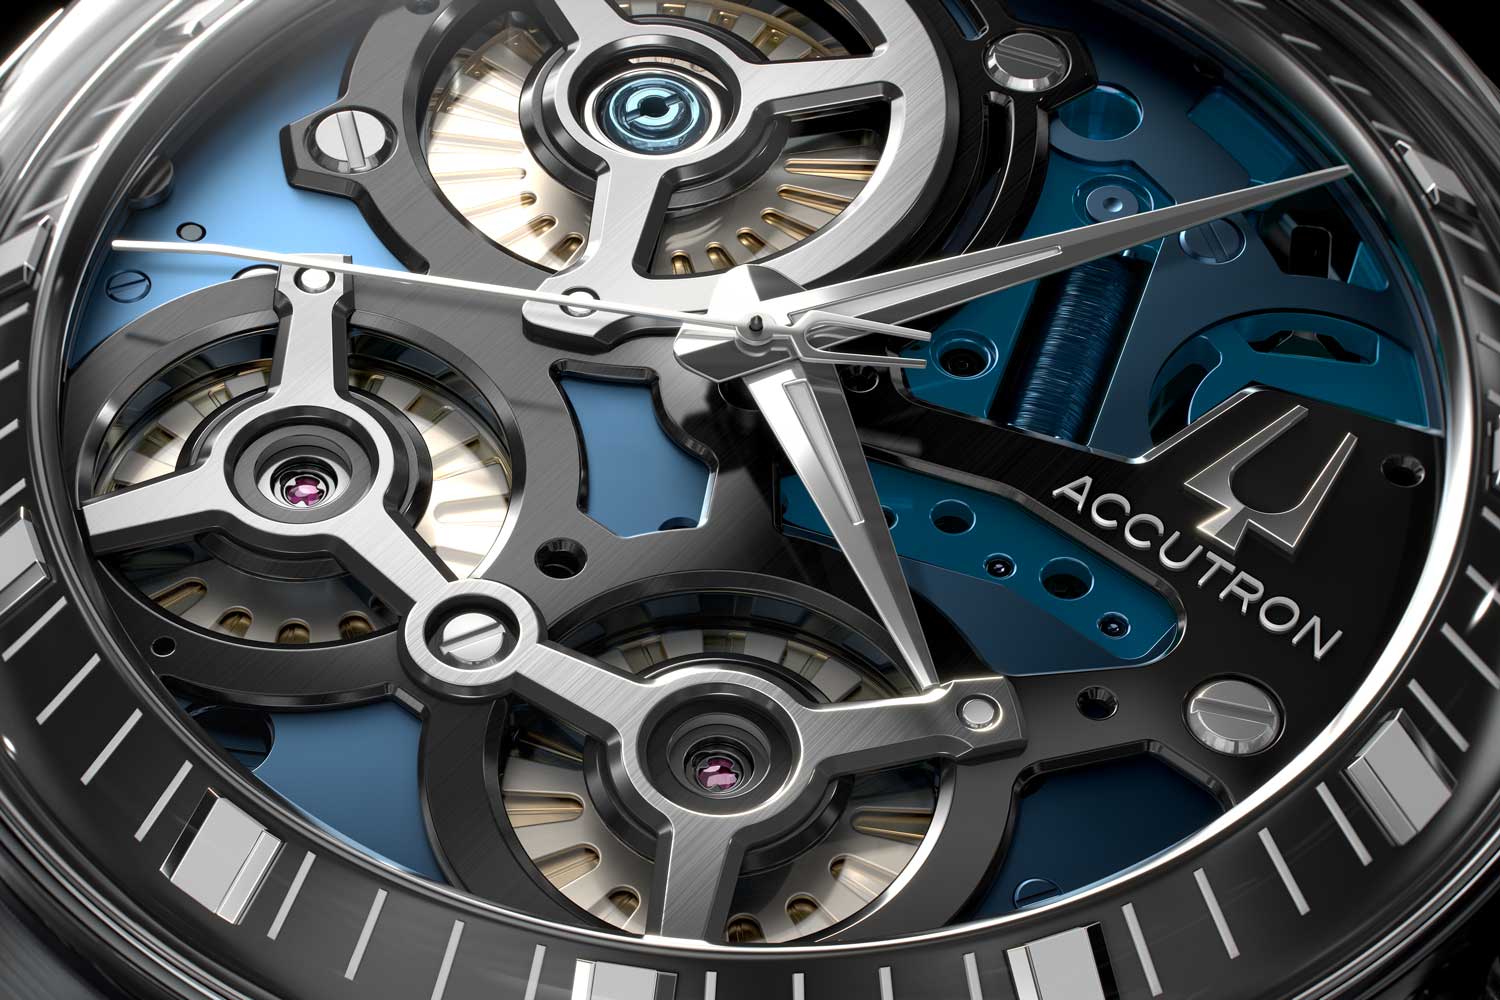 The DNA collection offers four models with different movement plate colorway designs